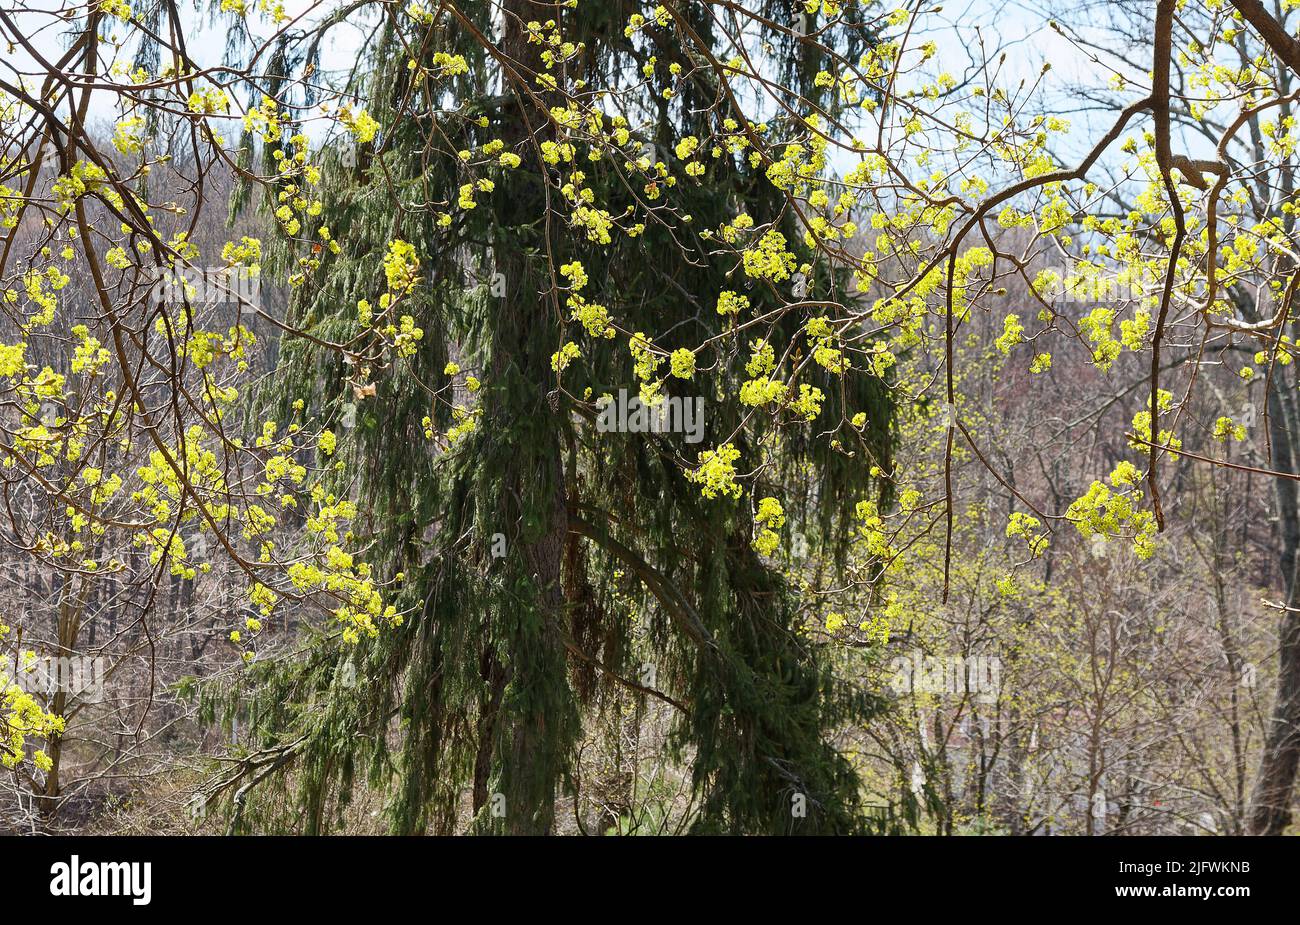 new leaf growth, deciduous trees, bright green, nature, close-up, early spring rejuvenation, evergreen tree, Pennsylvania Stock Photo